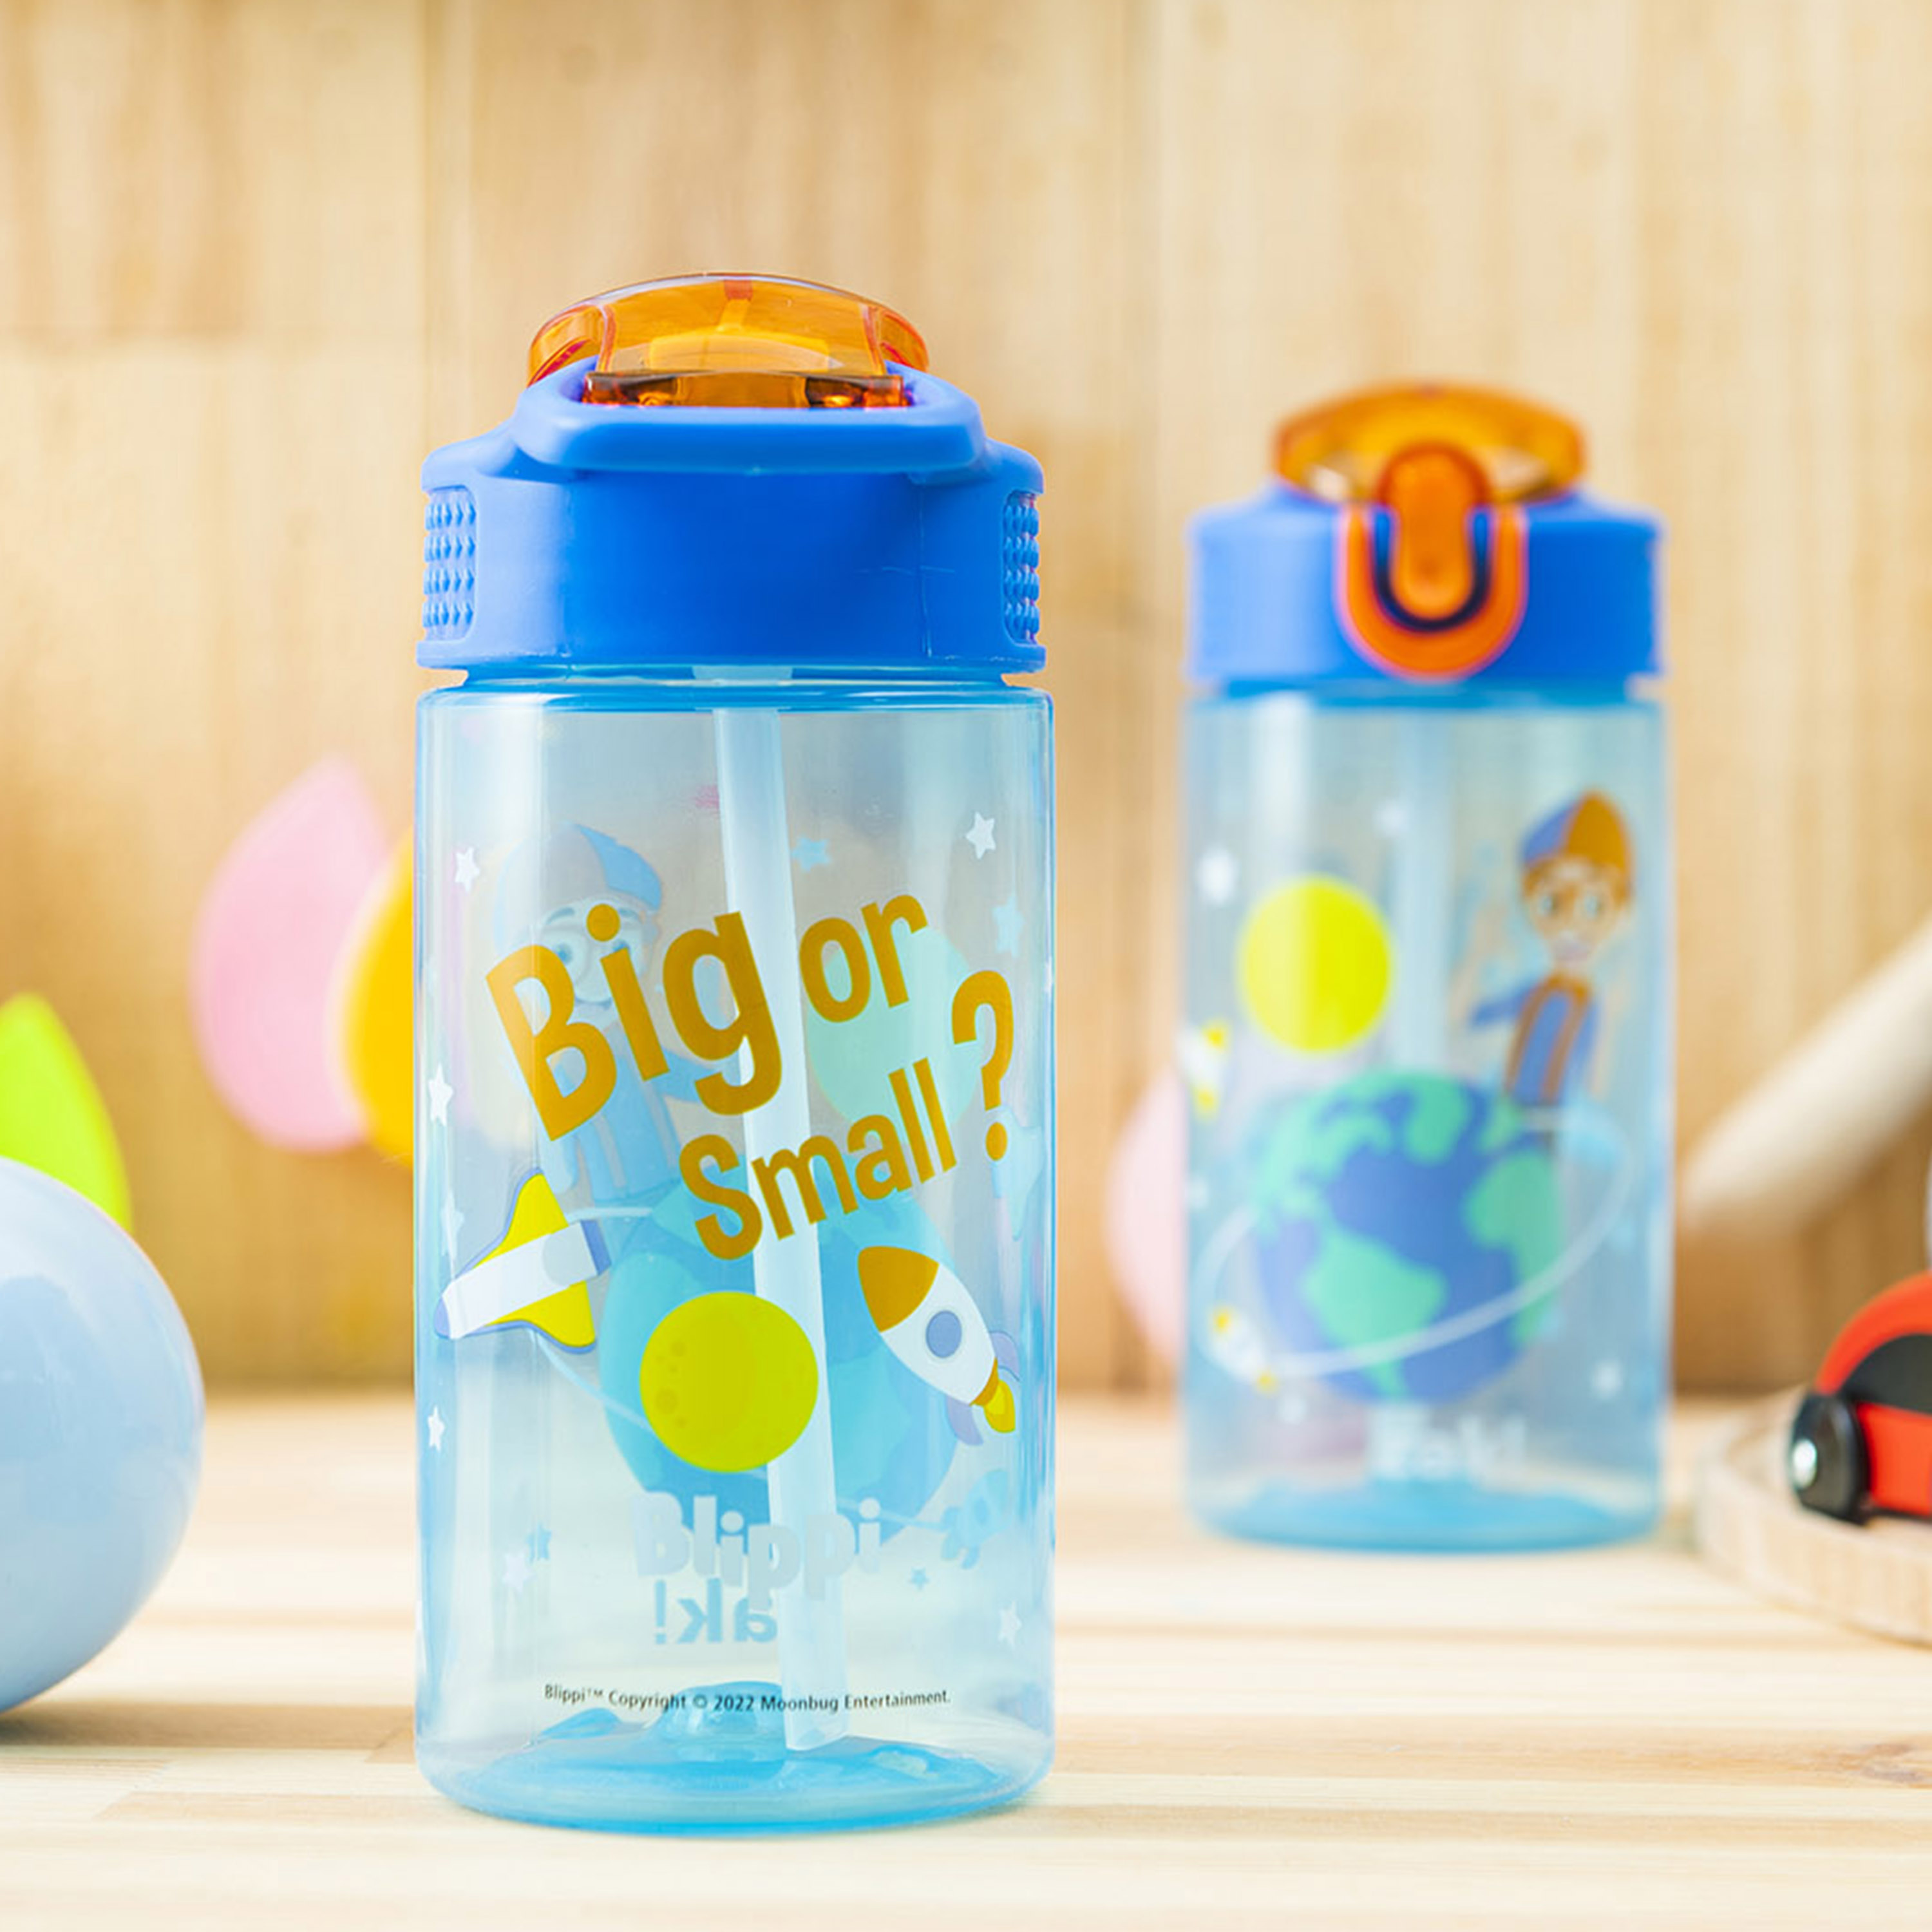 Blippi 16 ounce Reusable Plastic Water Bottle with Straw, Big or Small?, 2-piece set slideshow image 4